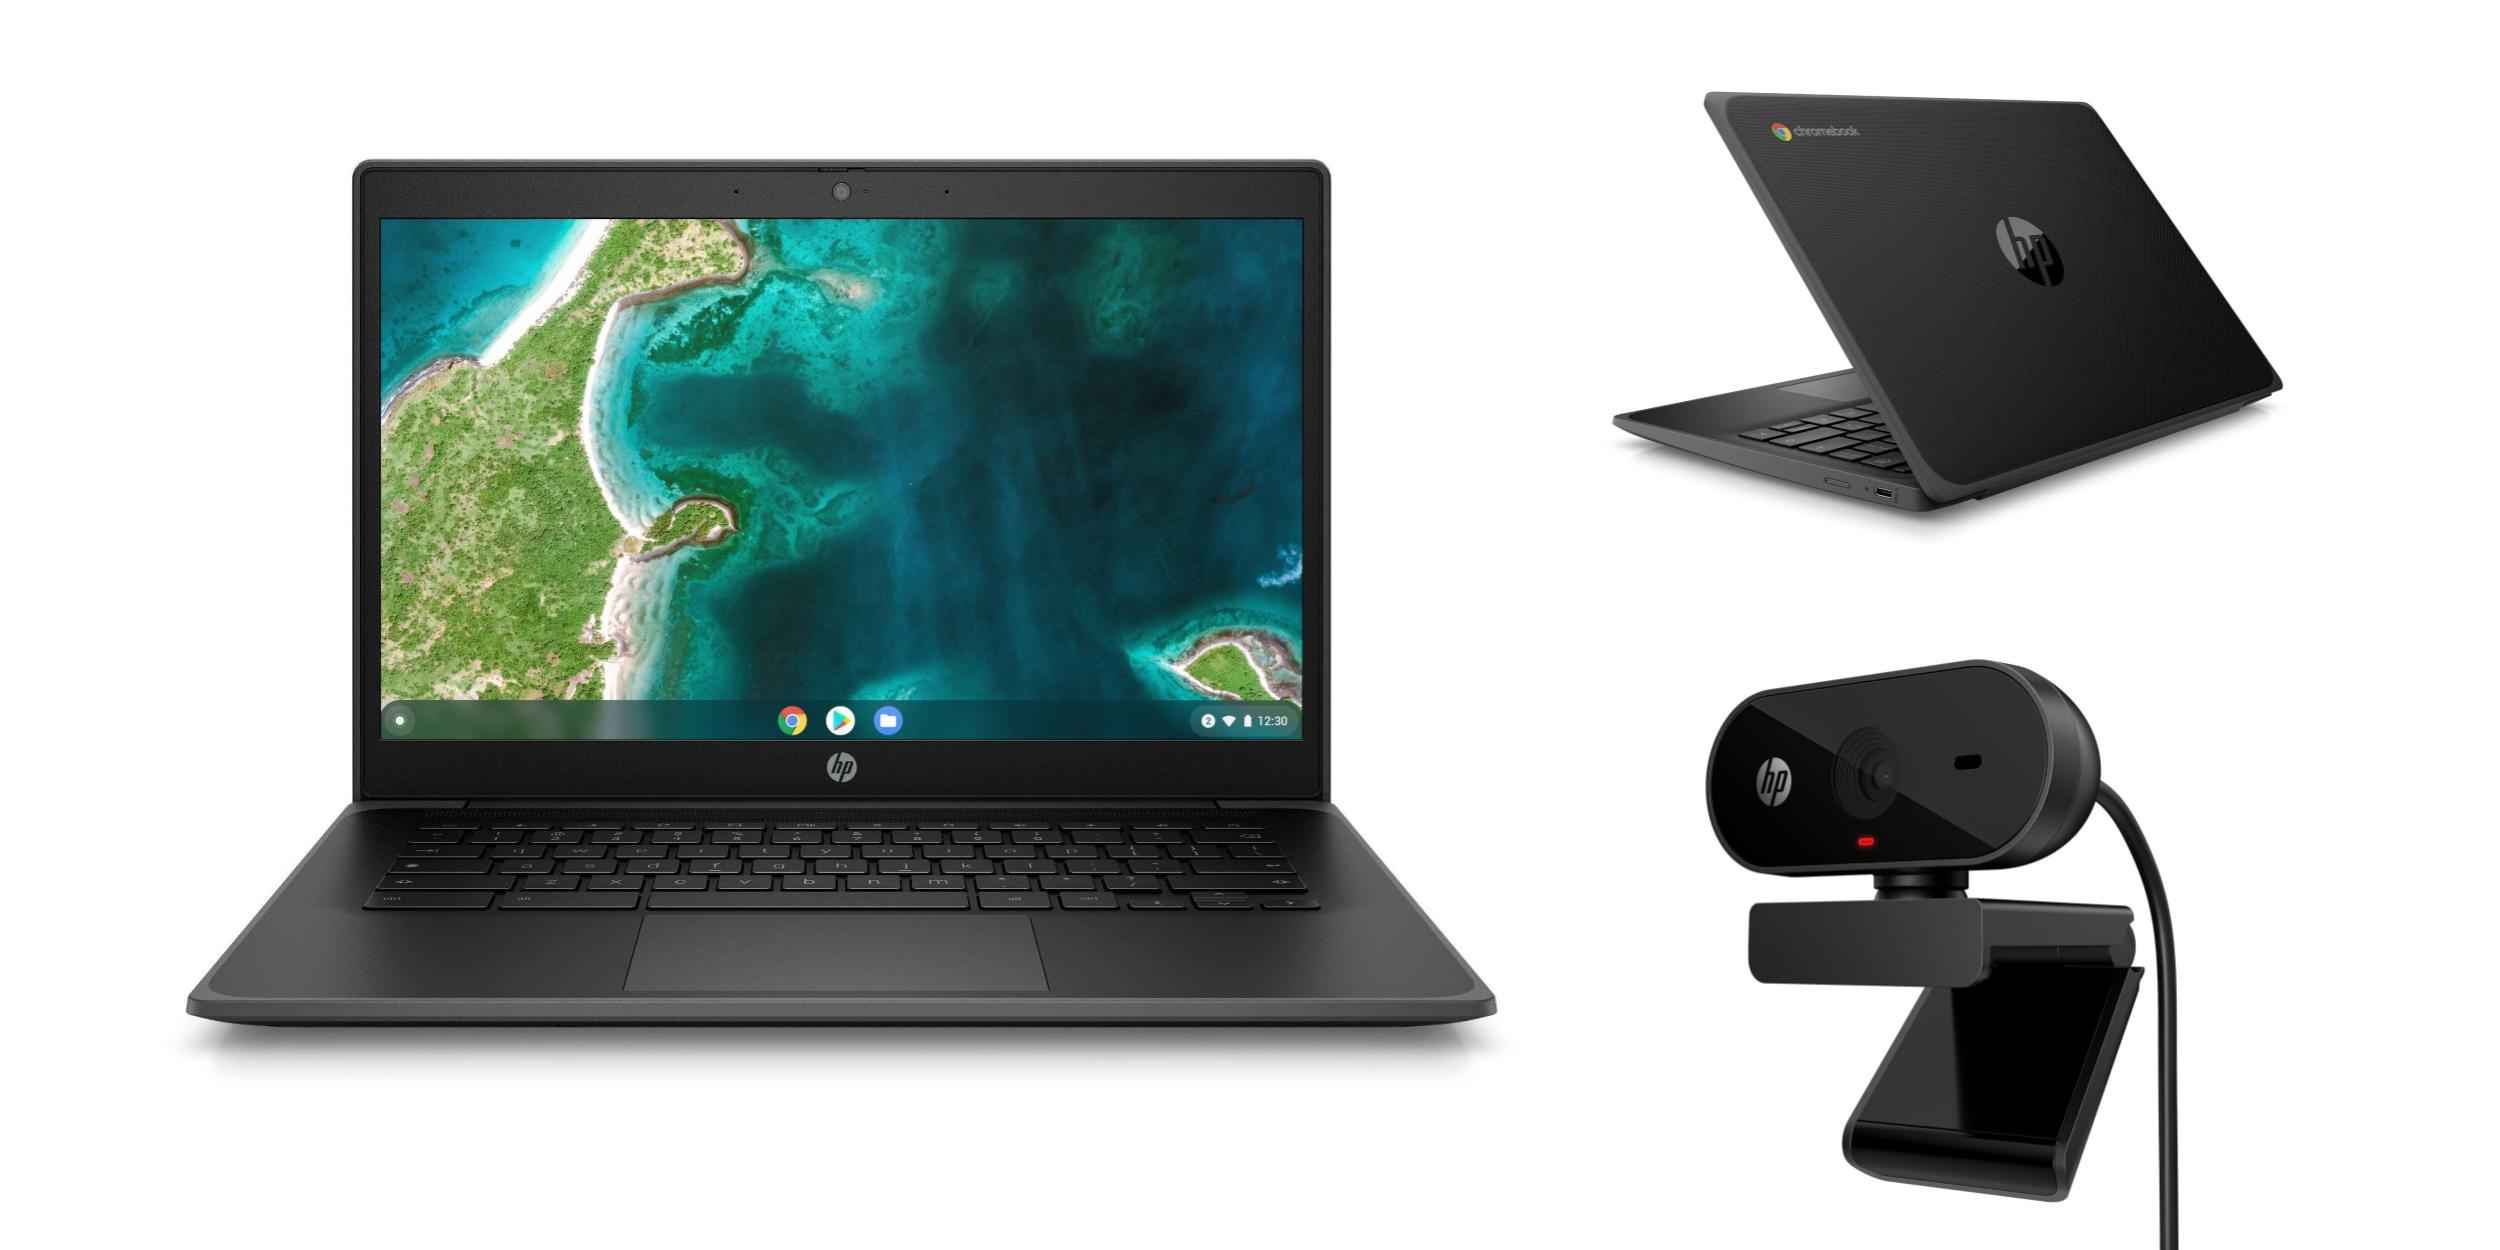 The HP Fortis Chromebooks are presented with a rough design, which suits students better